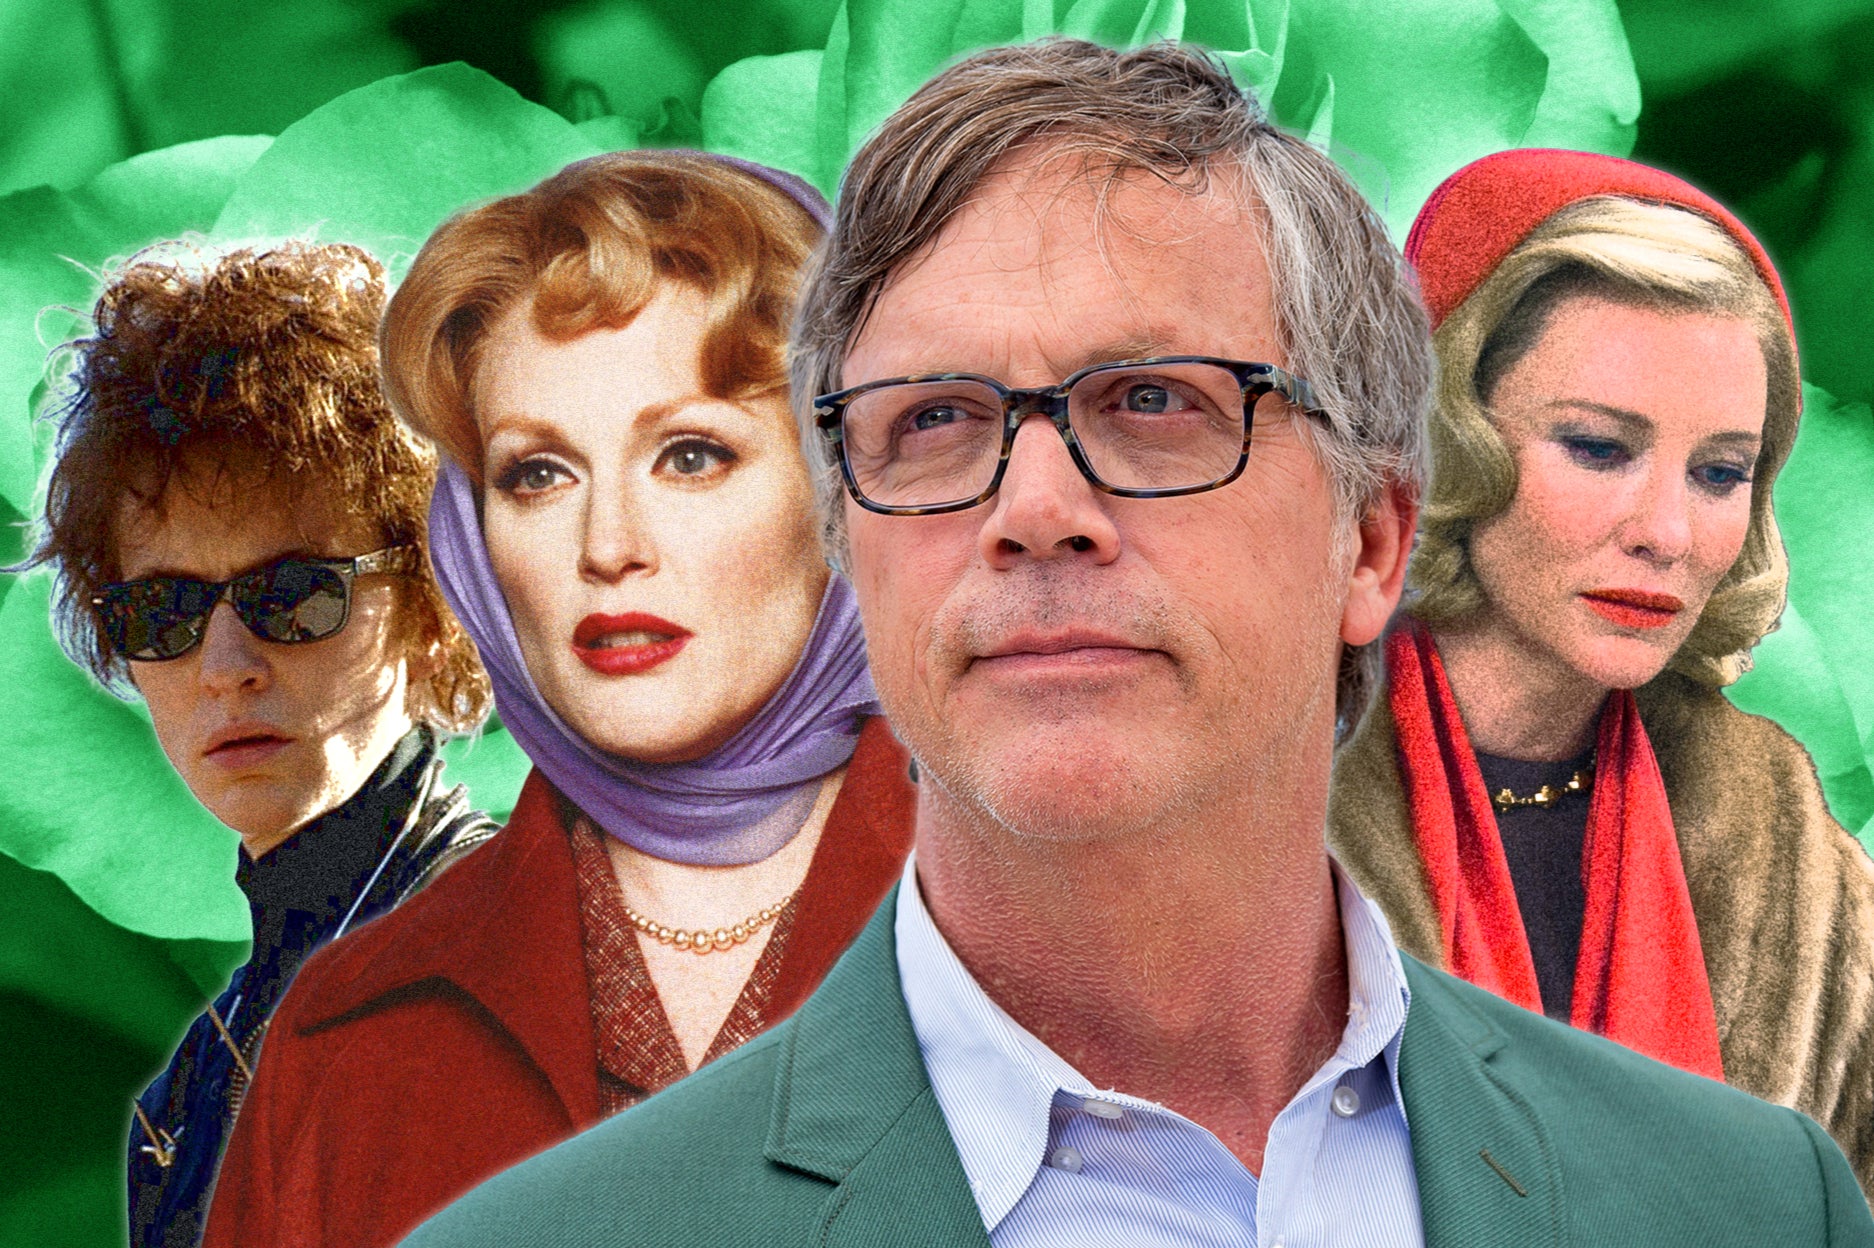 Filmmaker Todd Haynes on May December and being rejected by David Bowie